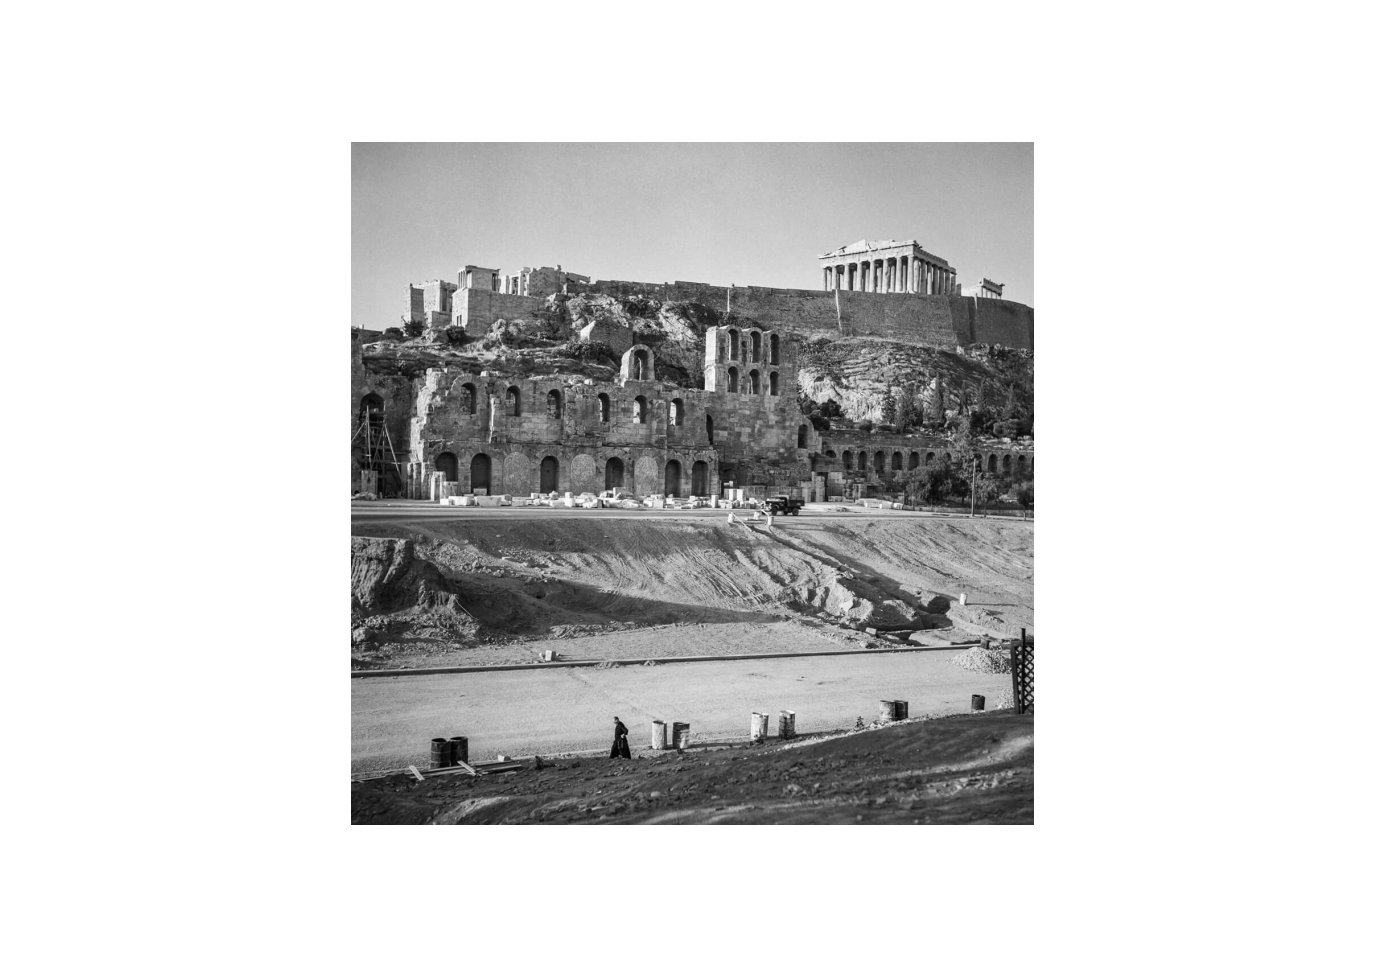 An old photograph of the Odeon of Herodes Atticus being restored by Robert McCabe.